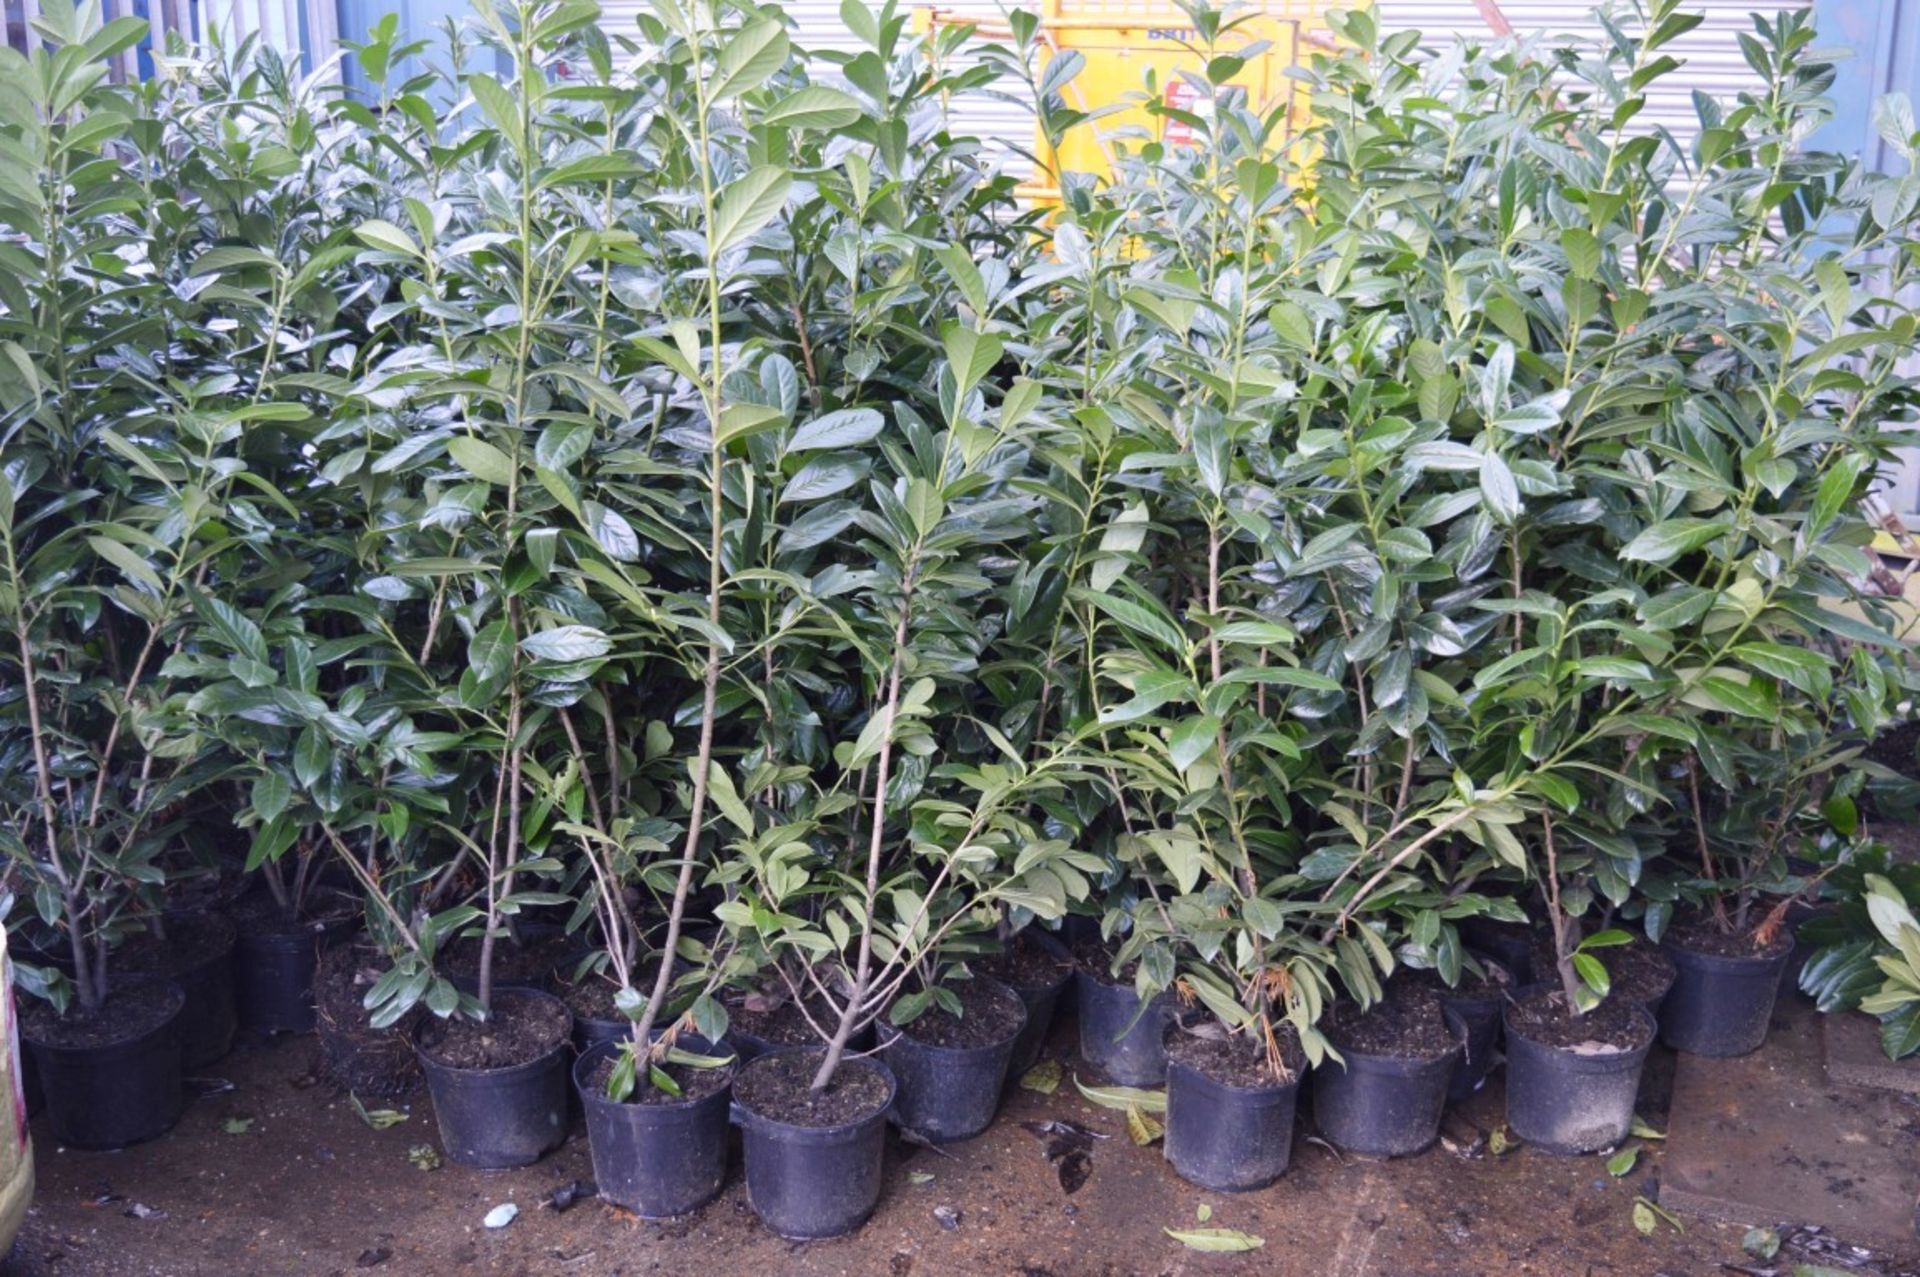 5 x Laurel Potted Garden Plants - Approx 4 to 5 Feet Tall - CL057 - Location: Welwyn, Hertfordshire, - Image 4 of 5